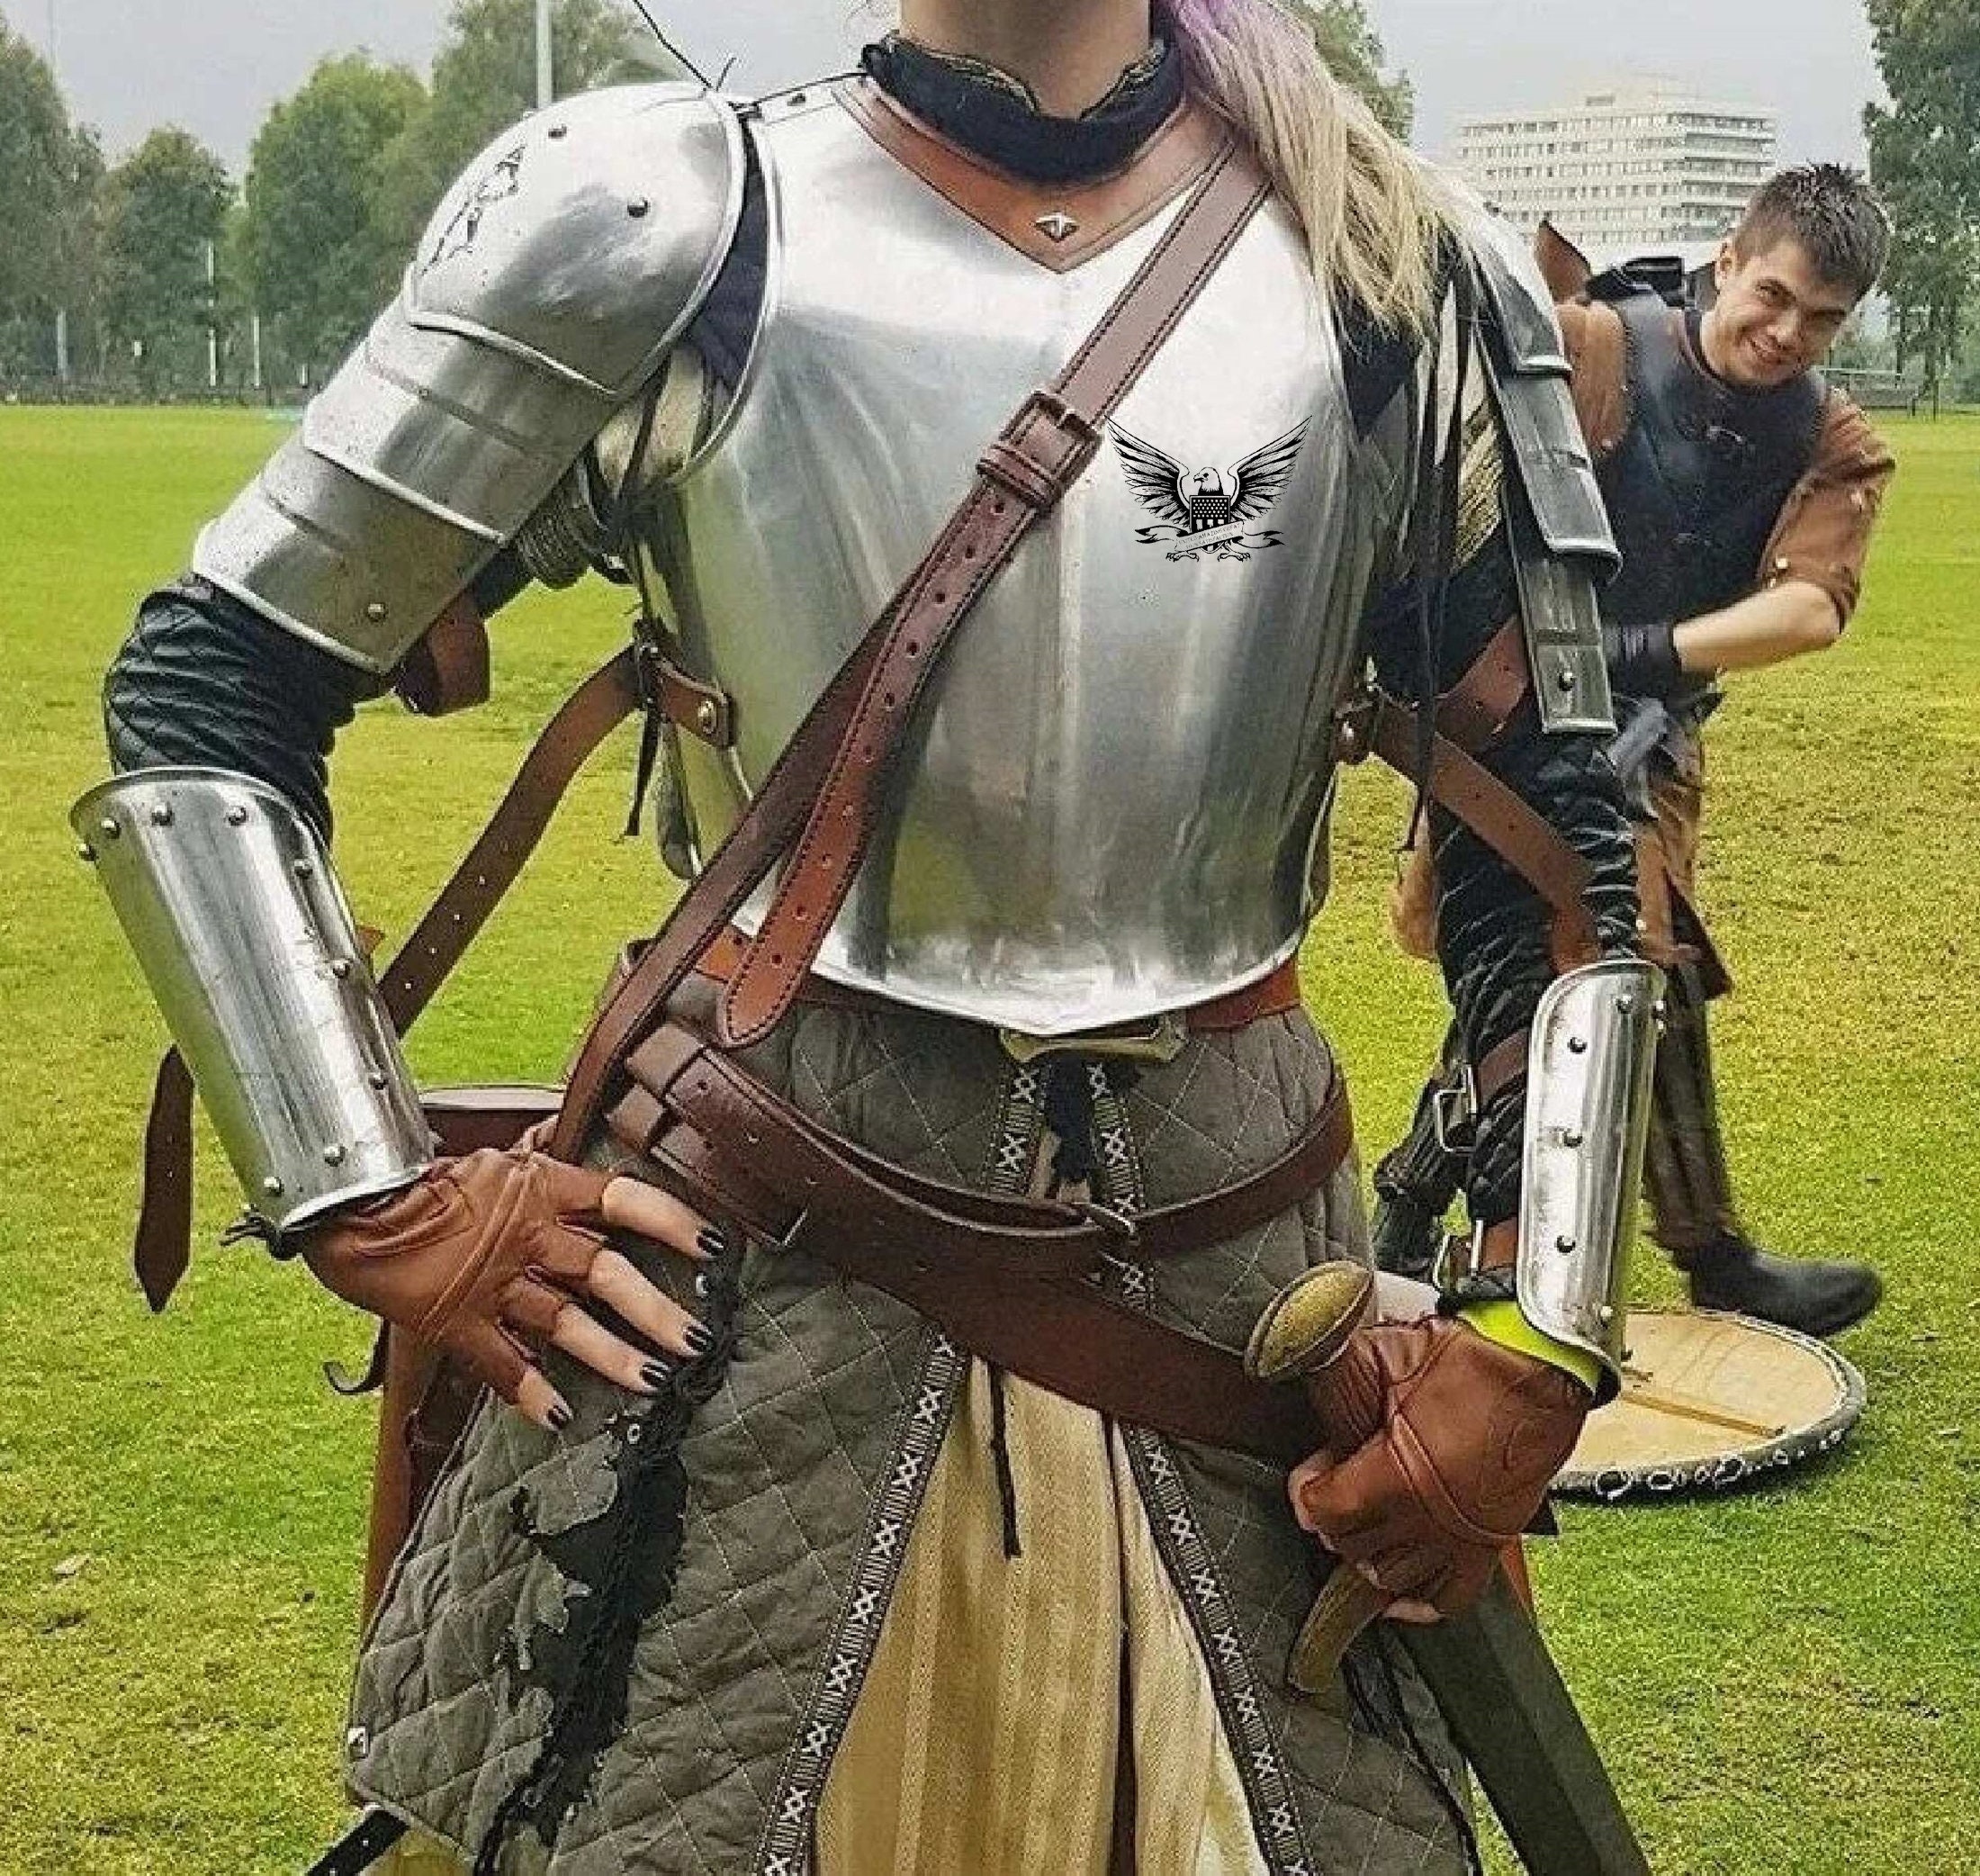 Fantasy Stainless Full Women's Lady-Warrior Armor Set for sale. Available  in: stainless, brown leather, black leather :: by medieval store ArmStreet